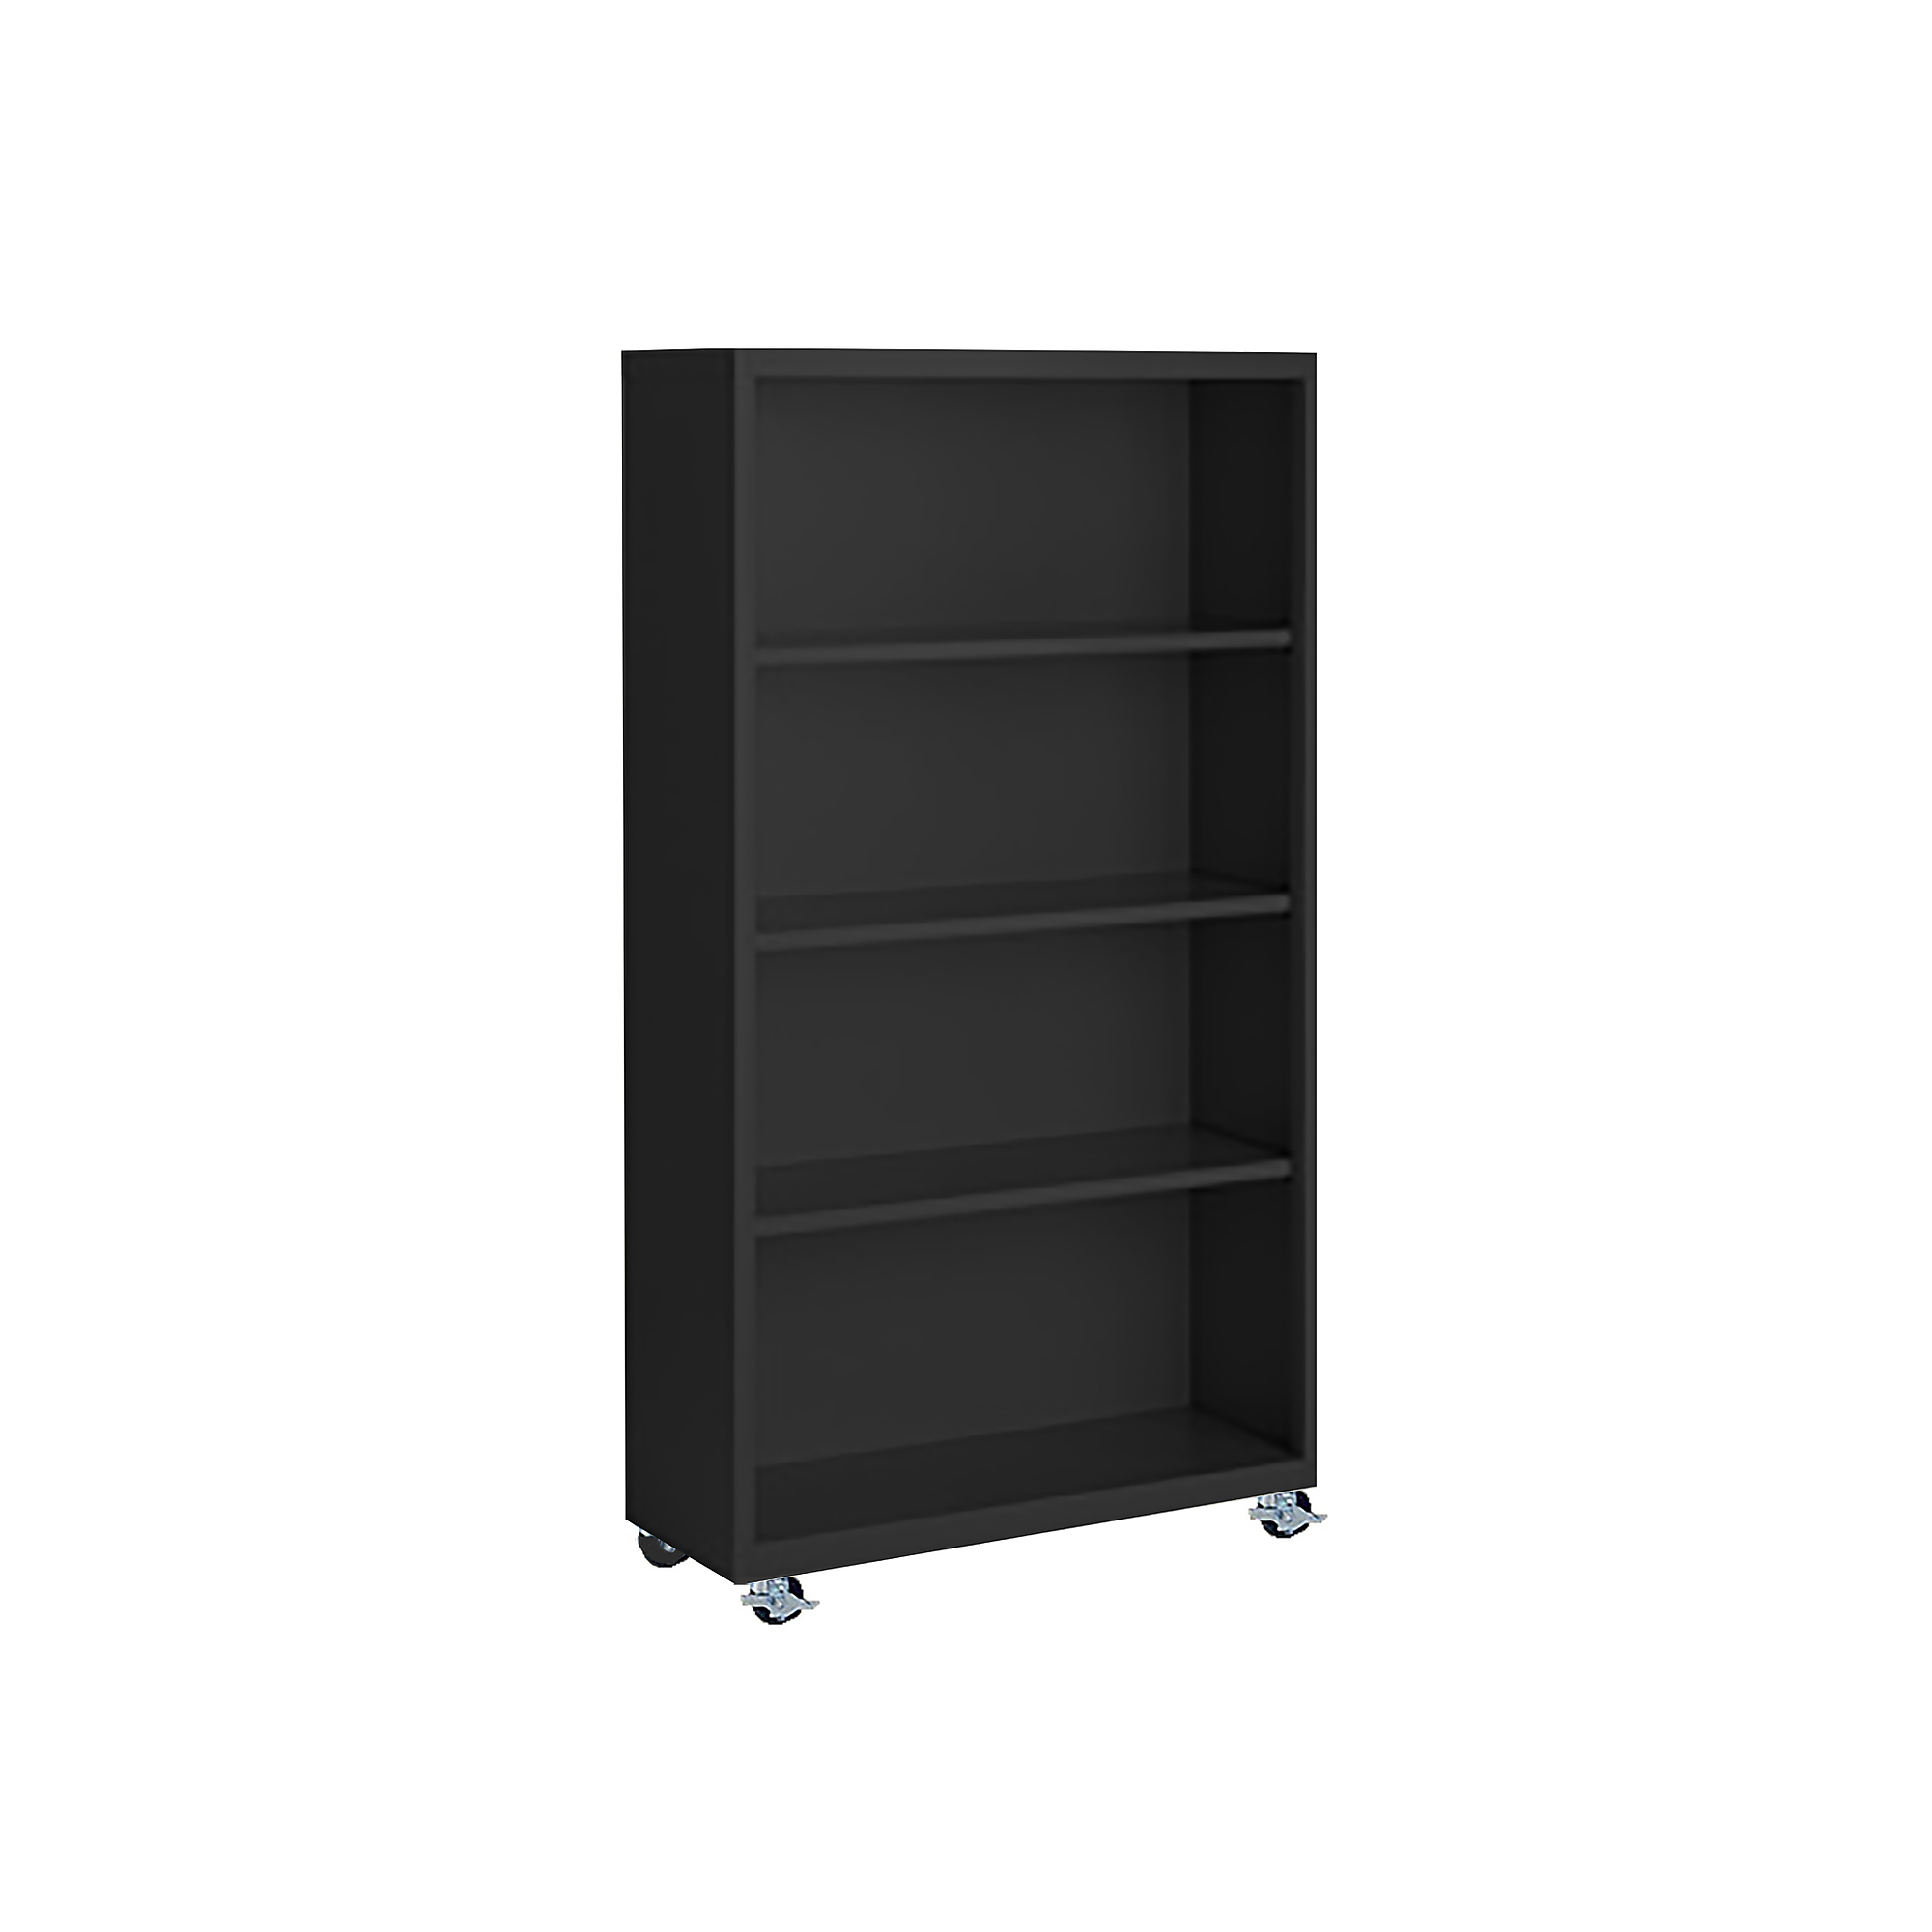 Steel Cabinets USA, 36Inchx18Inchx63Inch Black Mobile Bookcase Full Assembled, Height 63 in, Shelves (qty.) 4, Material Steel, Model MBCA-366318-B